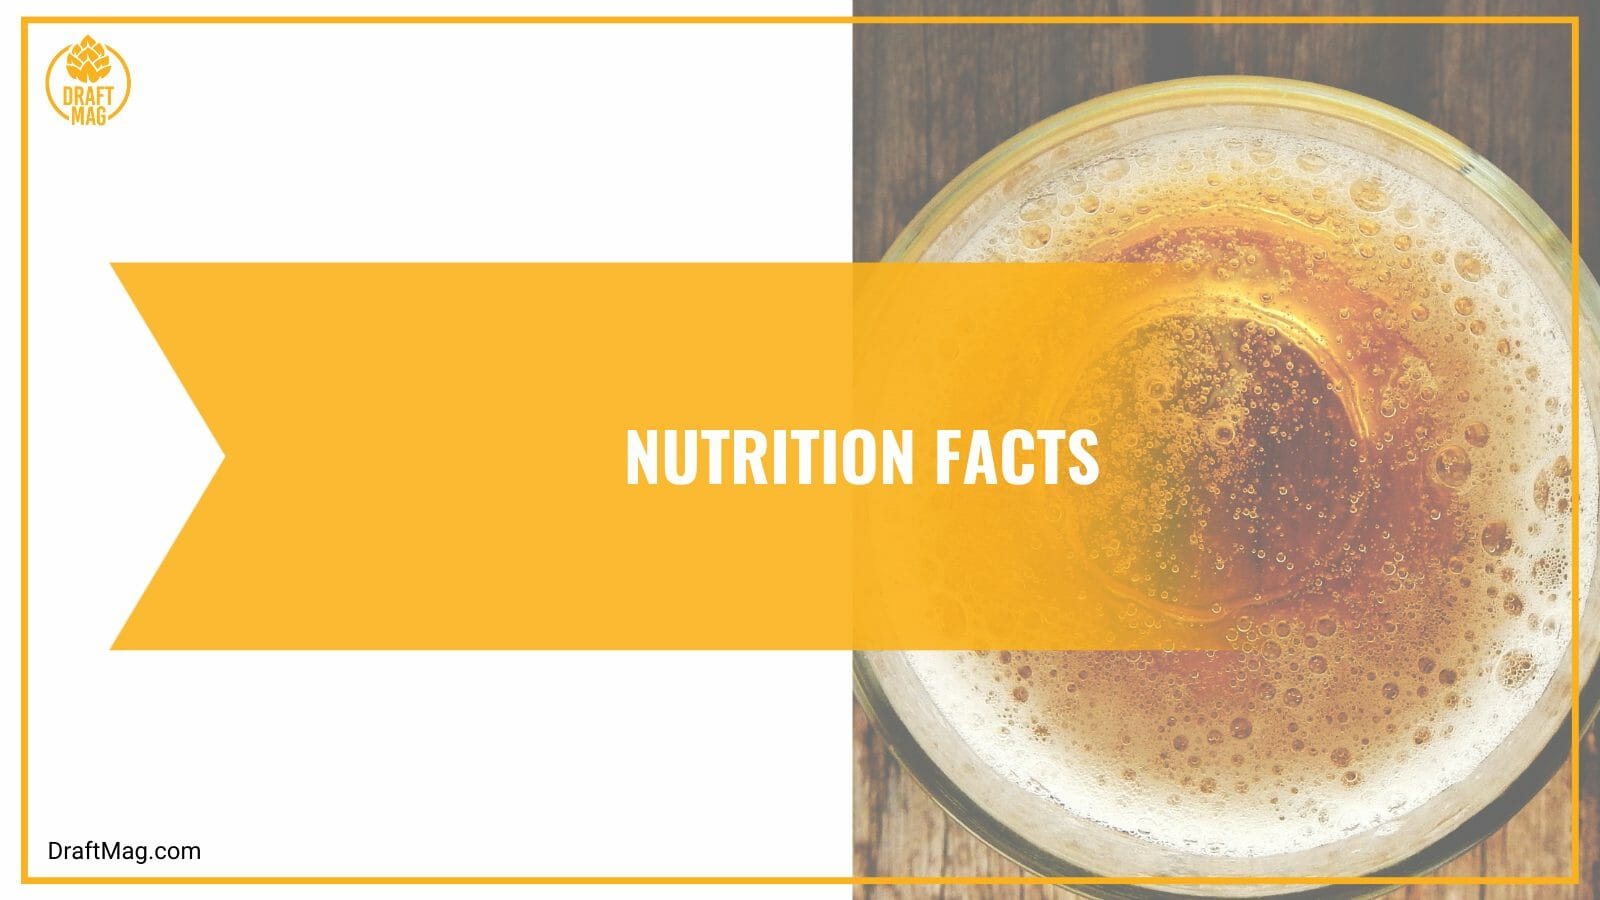 Nutrition Facts of Bombshell Blonde Beer